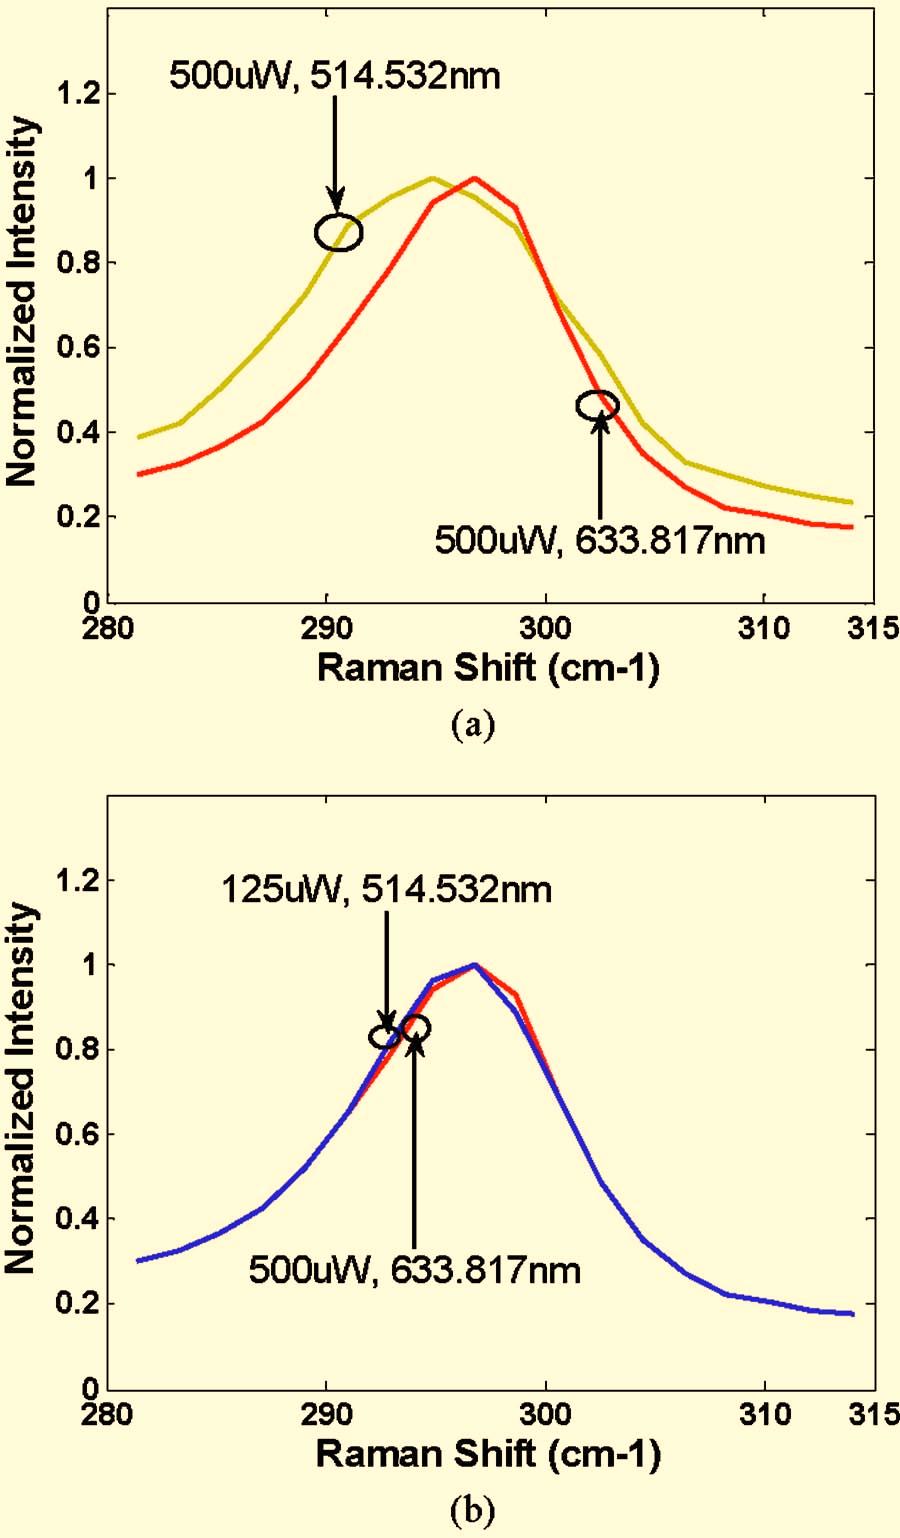 Color online a Comparison of Raman spectra of GeNW sample 3 D=5 nm measured at 500 W with 514.532 and 633.817 nm excitation wavelengths.